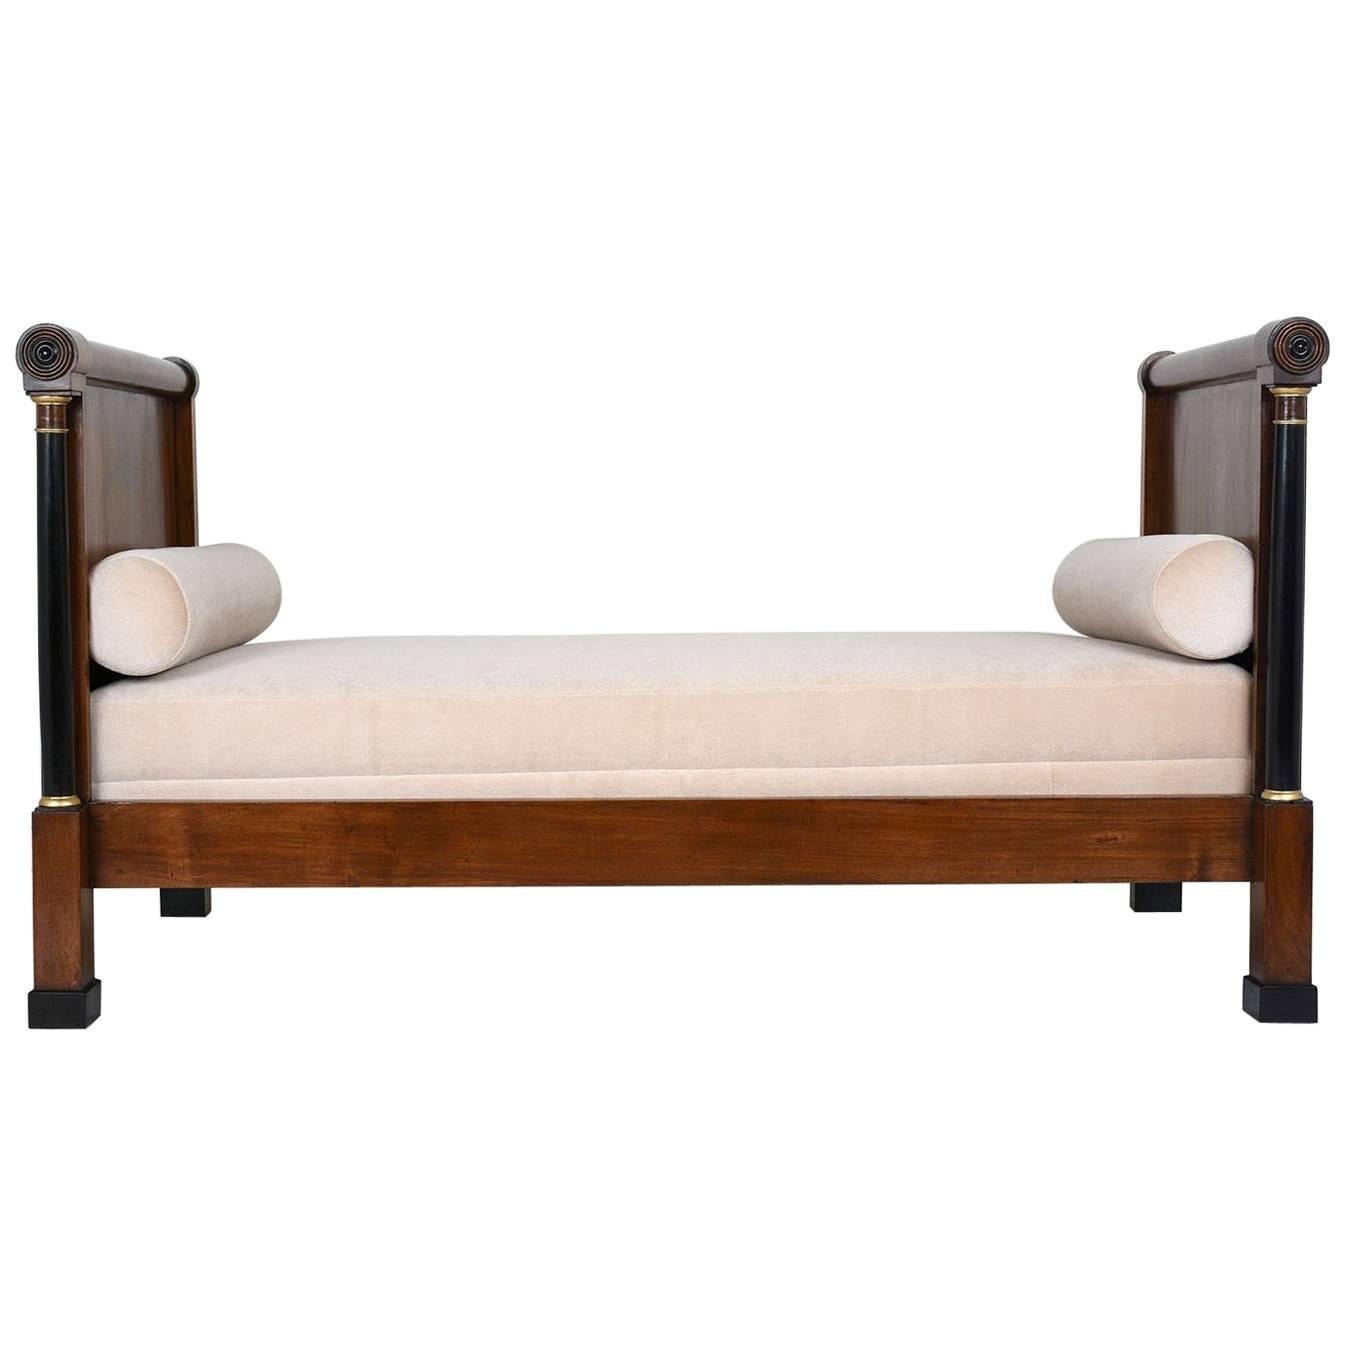 19th Century French Walnut Empire-style Daybed